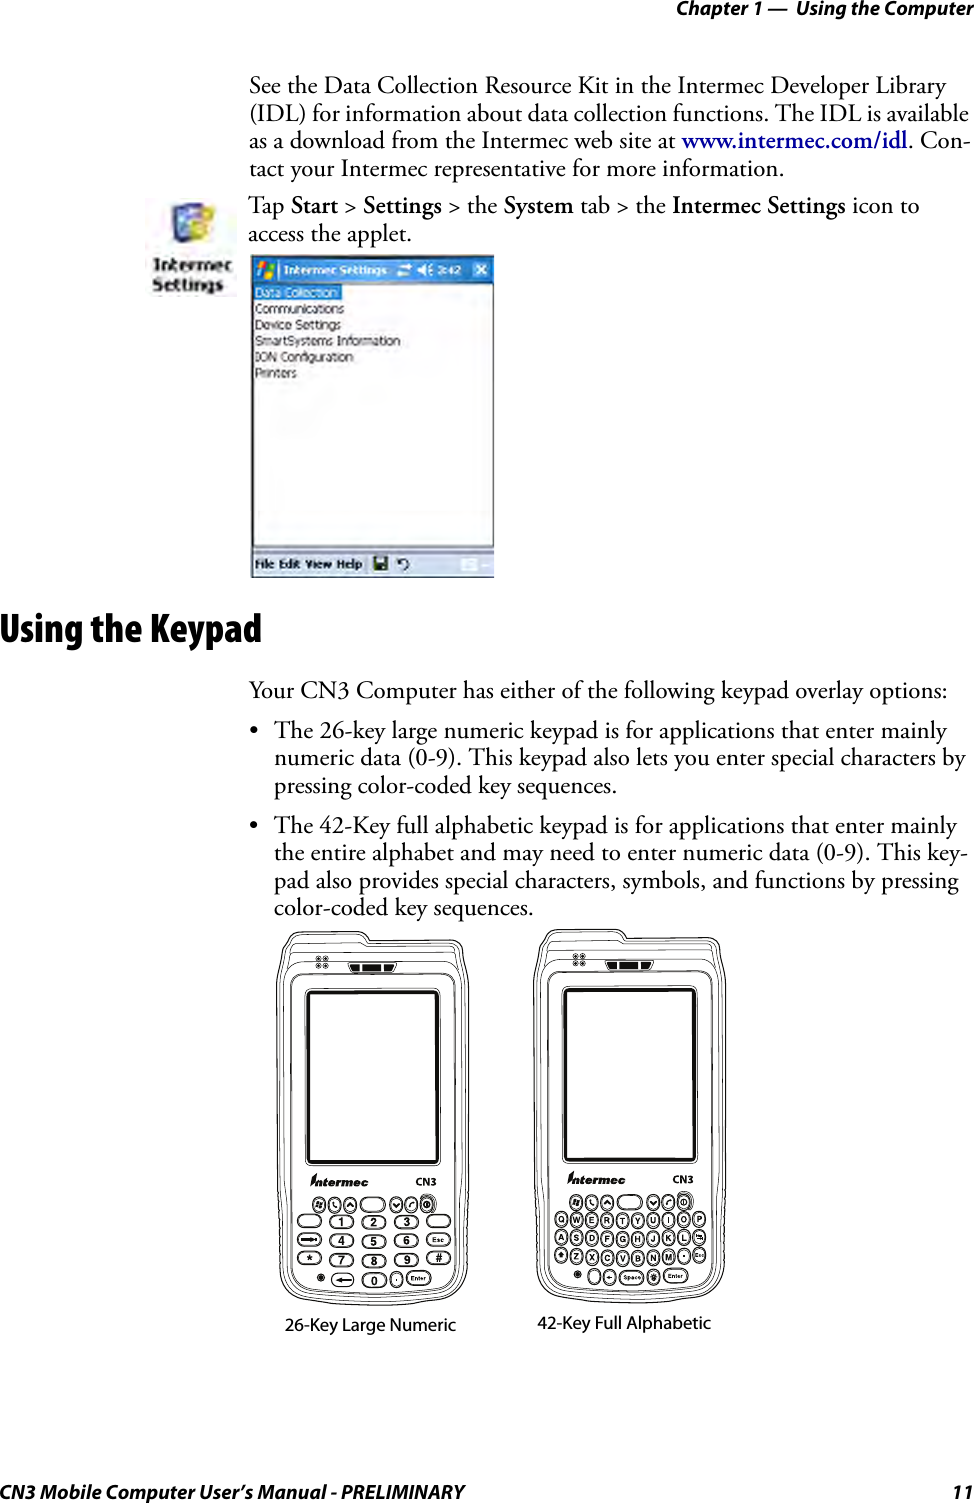 Chapter 1 —  Using the ComputerCN3 Mobile Computer User’s Manual - PRELIMINARY 11See the Data Collection Resource Kit in the Intermec Developer Library (IDL) for information about data collection functions. The IDL is available as a download from the Intermec web site at www.intermec.com/idl. Con-tact your Intermec representative for more information. Using the KeypadYour CN3 Computer has either of the following keypad overlay options:• The 26-key large numeric keypad is for applications that enter mainly numeric data (0-9). This keypad also lets you enter special characters by pressing color-coded key sequences.• The 42-Key full alphabetic keypad is for applications that enter mainly the entire alphabet and may need to enter numeric data (0-9). This key-pad also provides special characters, symbols, and functions by pressing color-coded key sequences.Tap Start &gt; Settings &gt; the System tab &gt; the Intermec Settings icon to access the applet.26-Key Large Numeric 42-Key Full Alphabetic